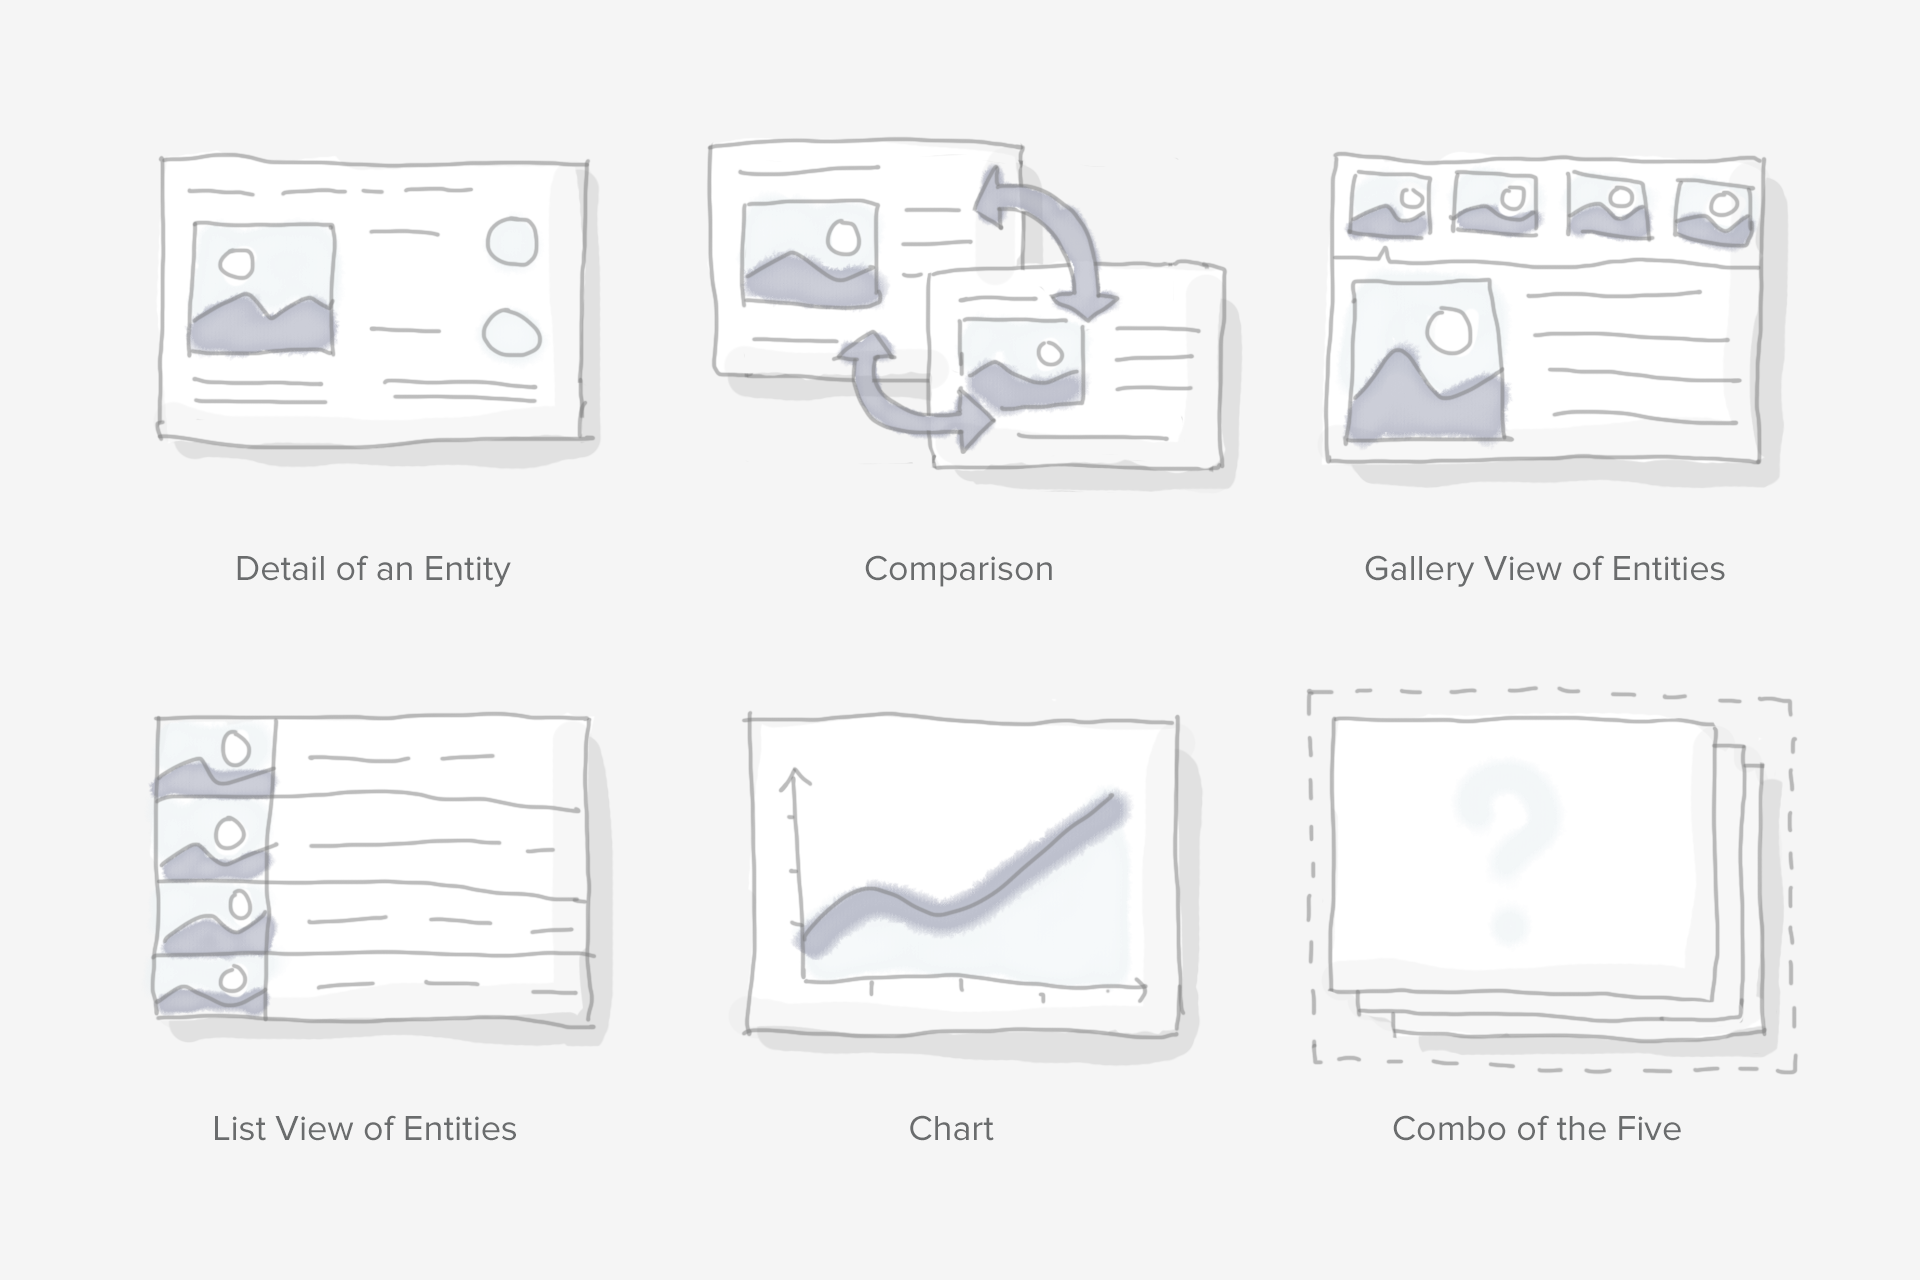 Types of visualizations: detail of an entity, comparison, galley view of entitles, list view of entities, chart, and combination of the five.